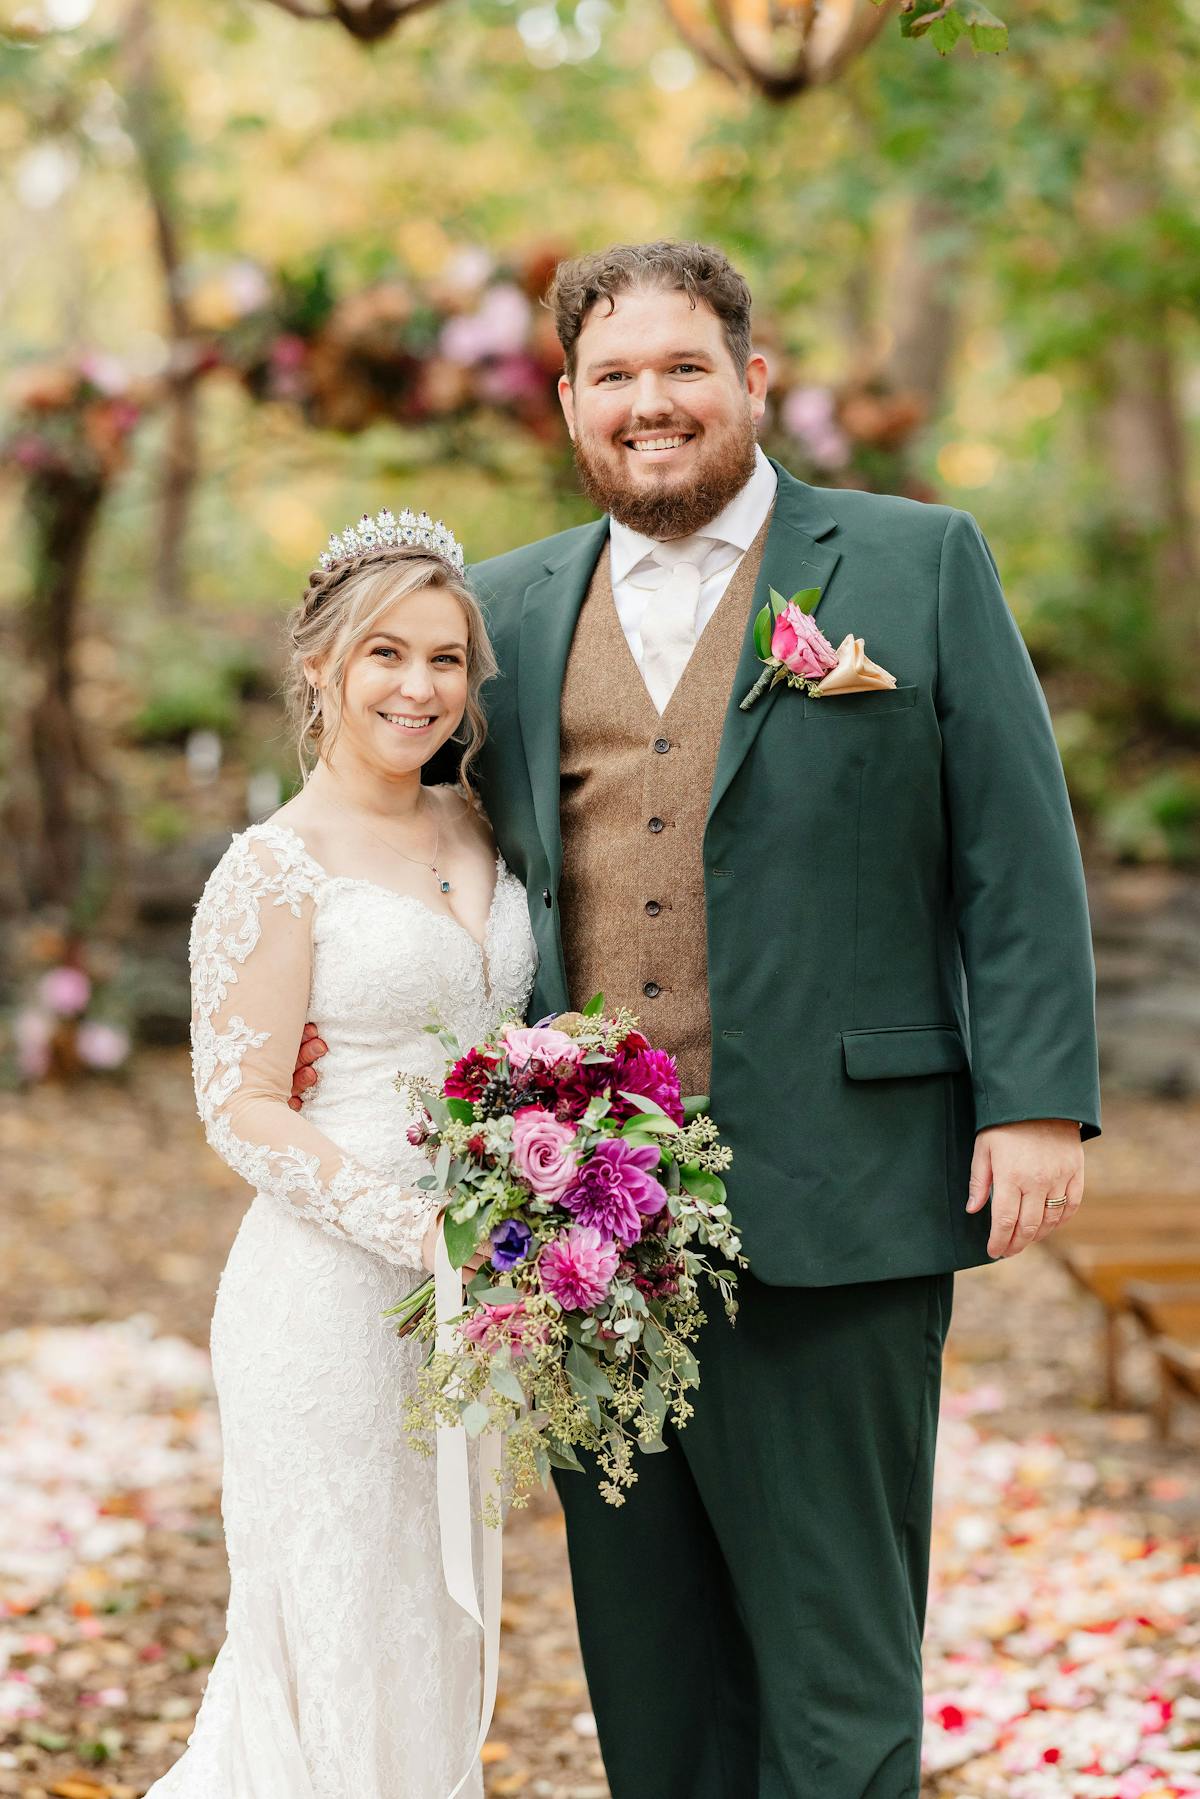 Newlywed pose in front of the altar with autumn wedding vibes for bride in lace long sleeve wedding gown and groom in forest green wedding suit and tweed vest.